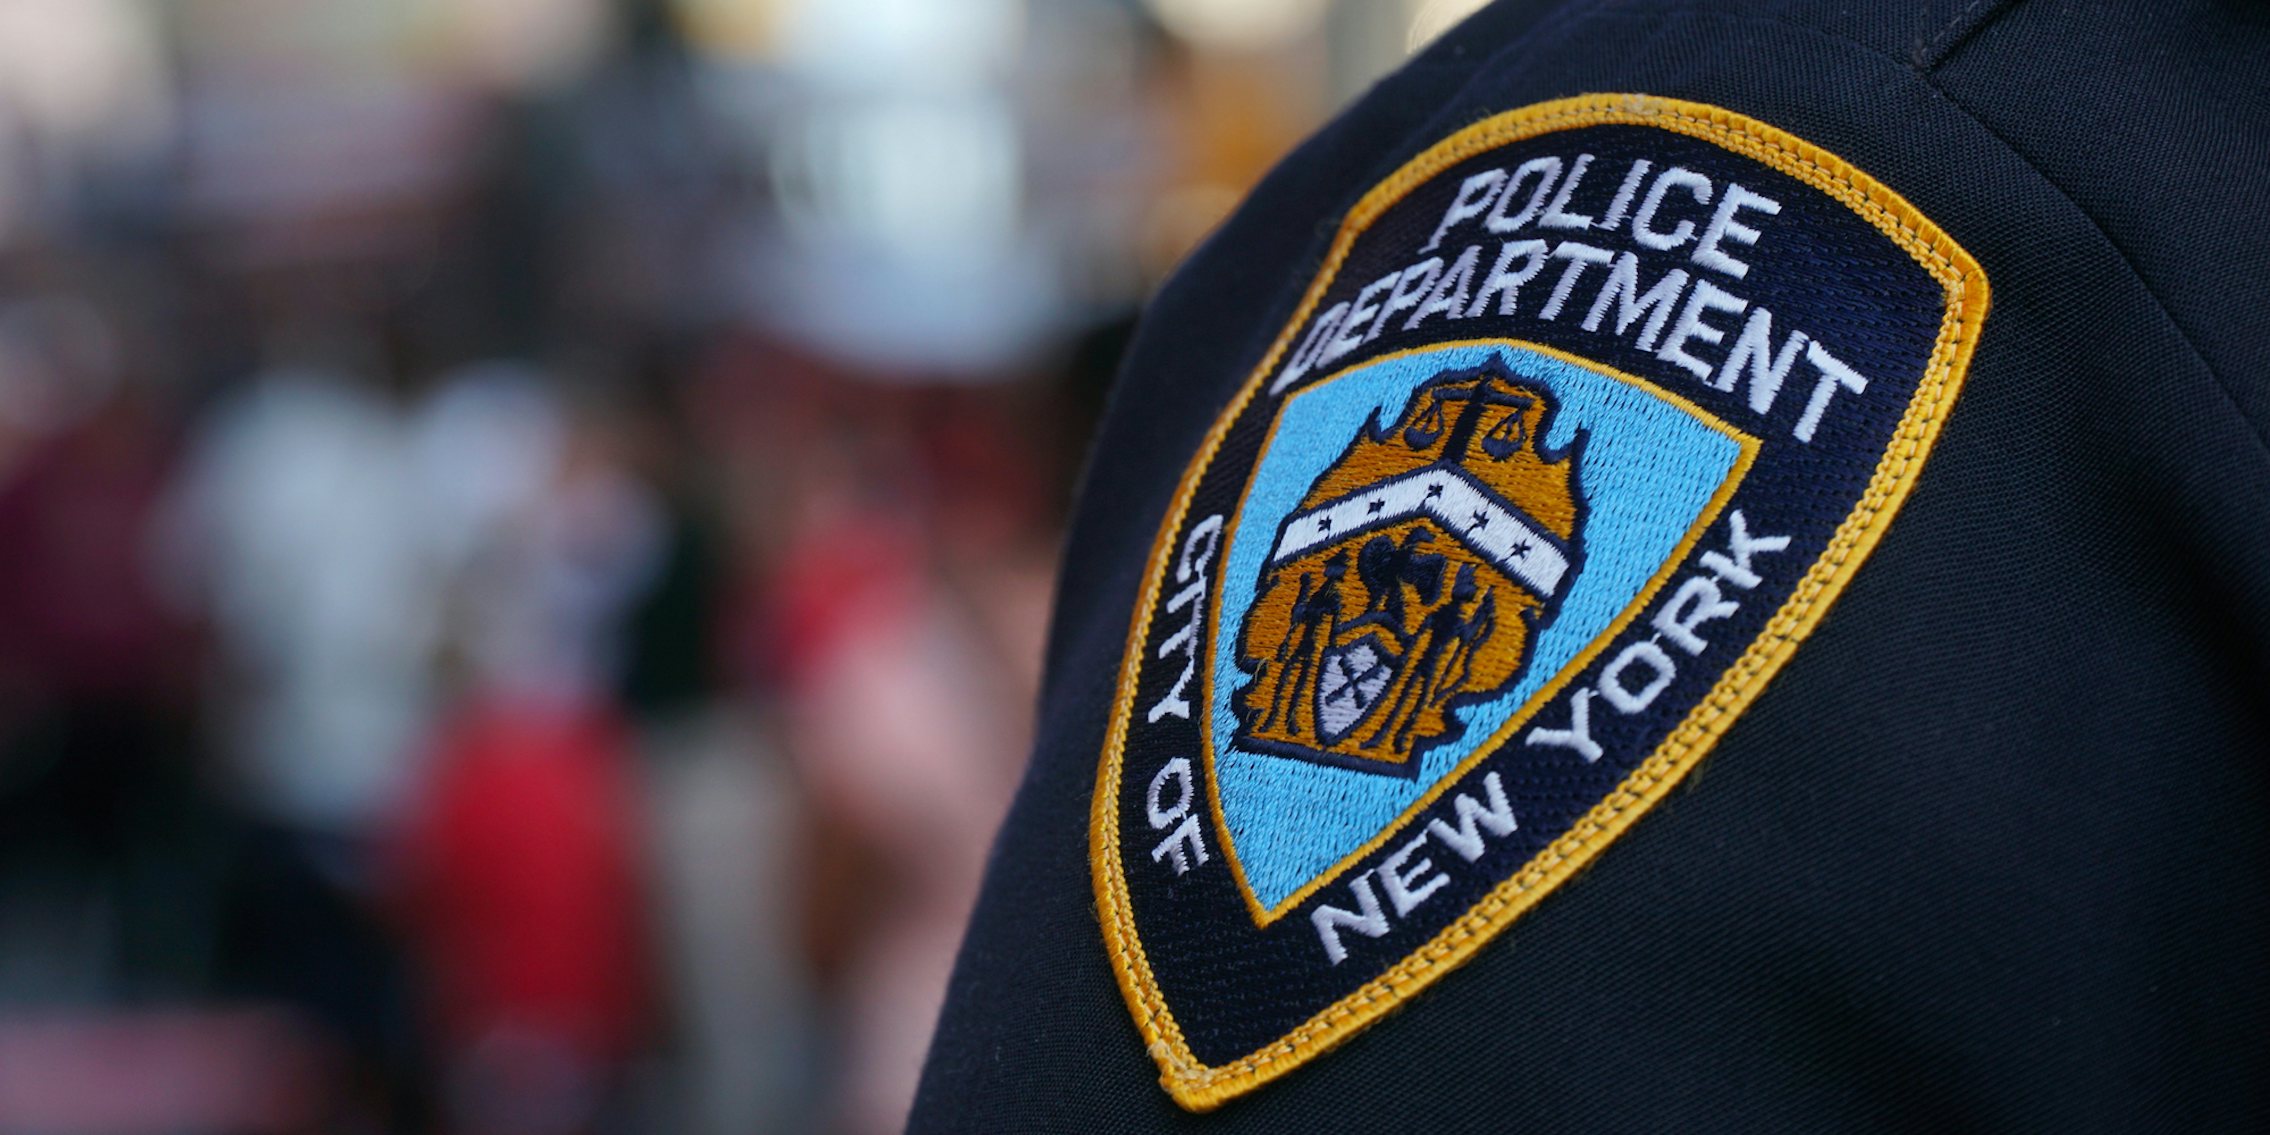 A NYPD badge on the shoulder of a police officer.